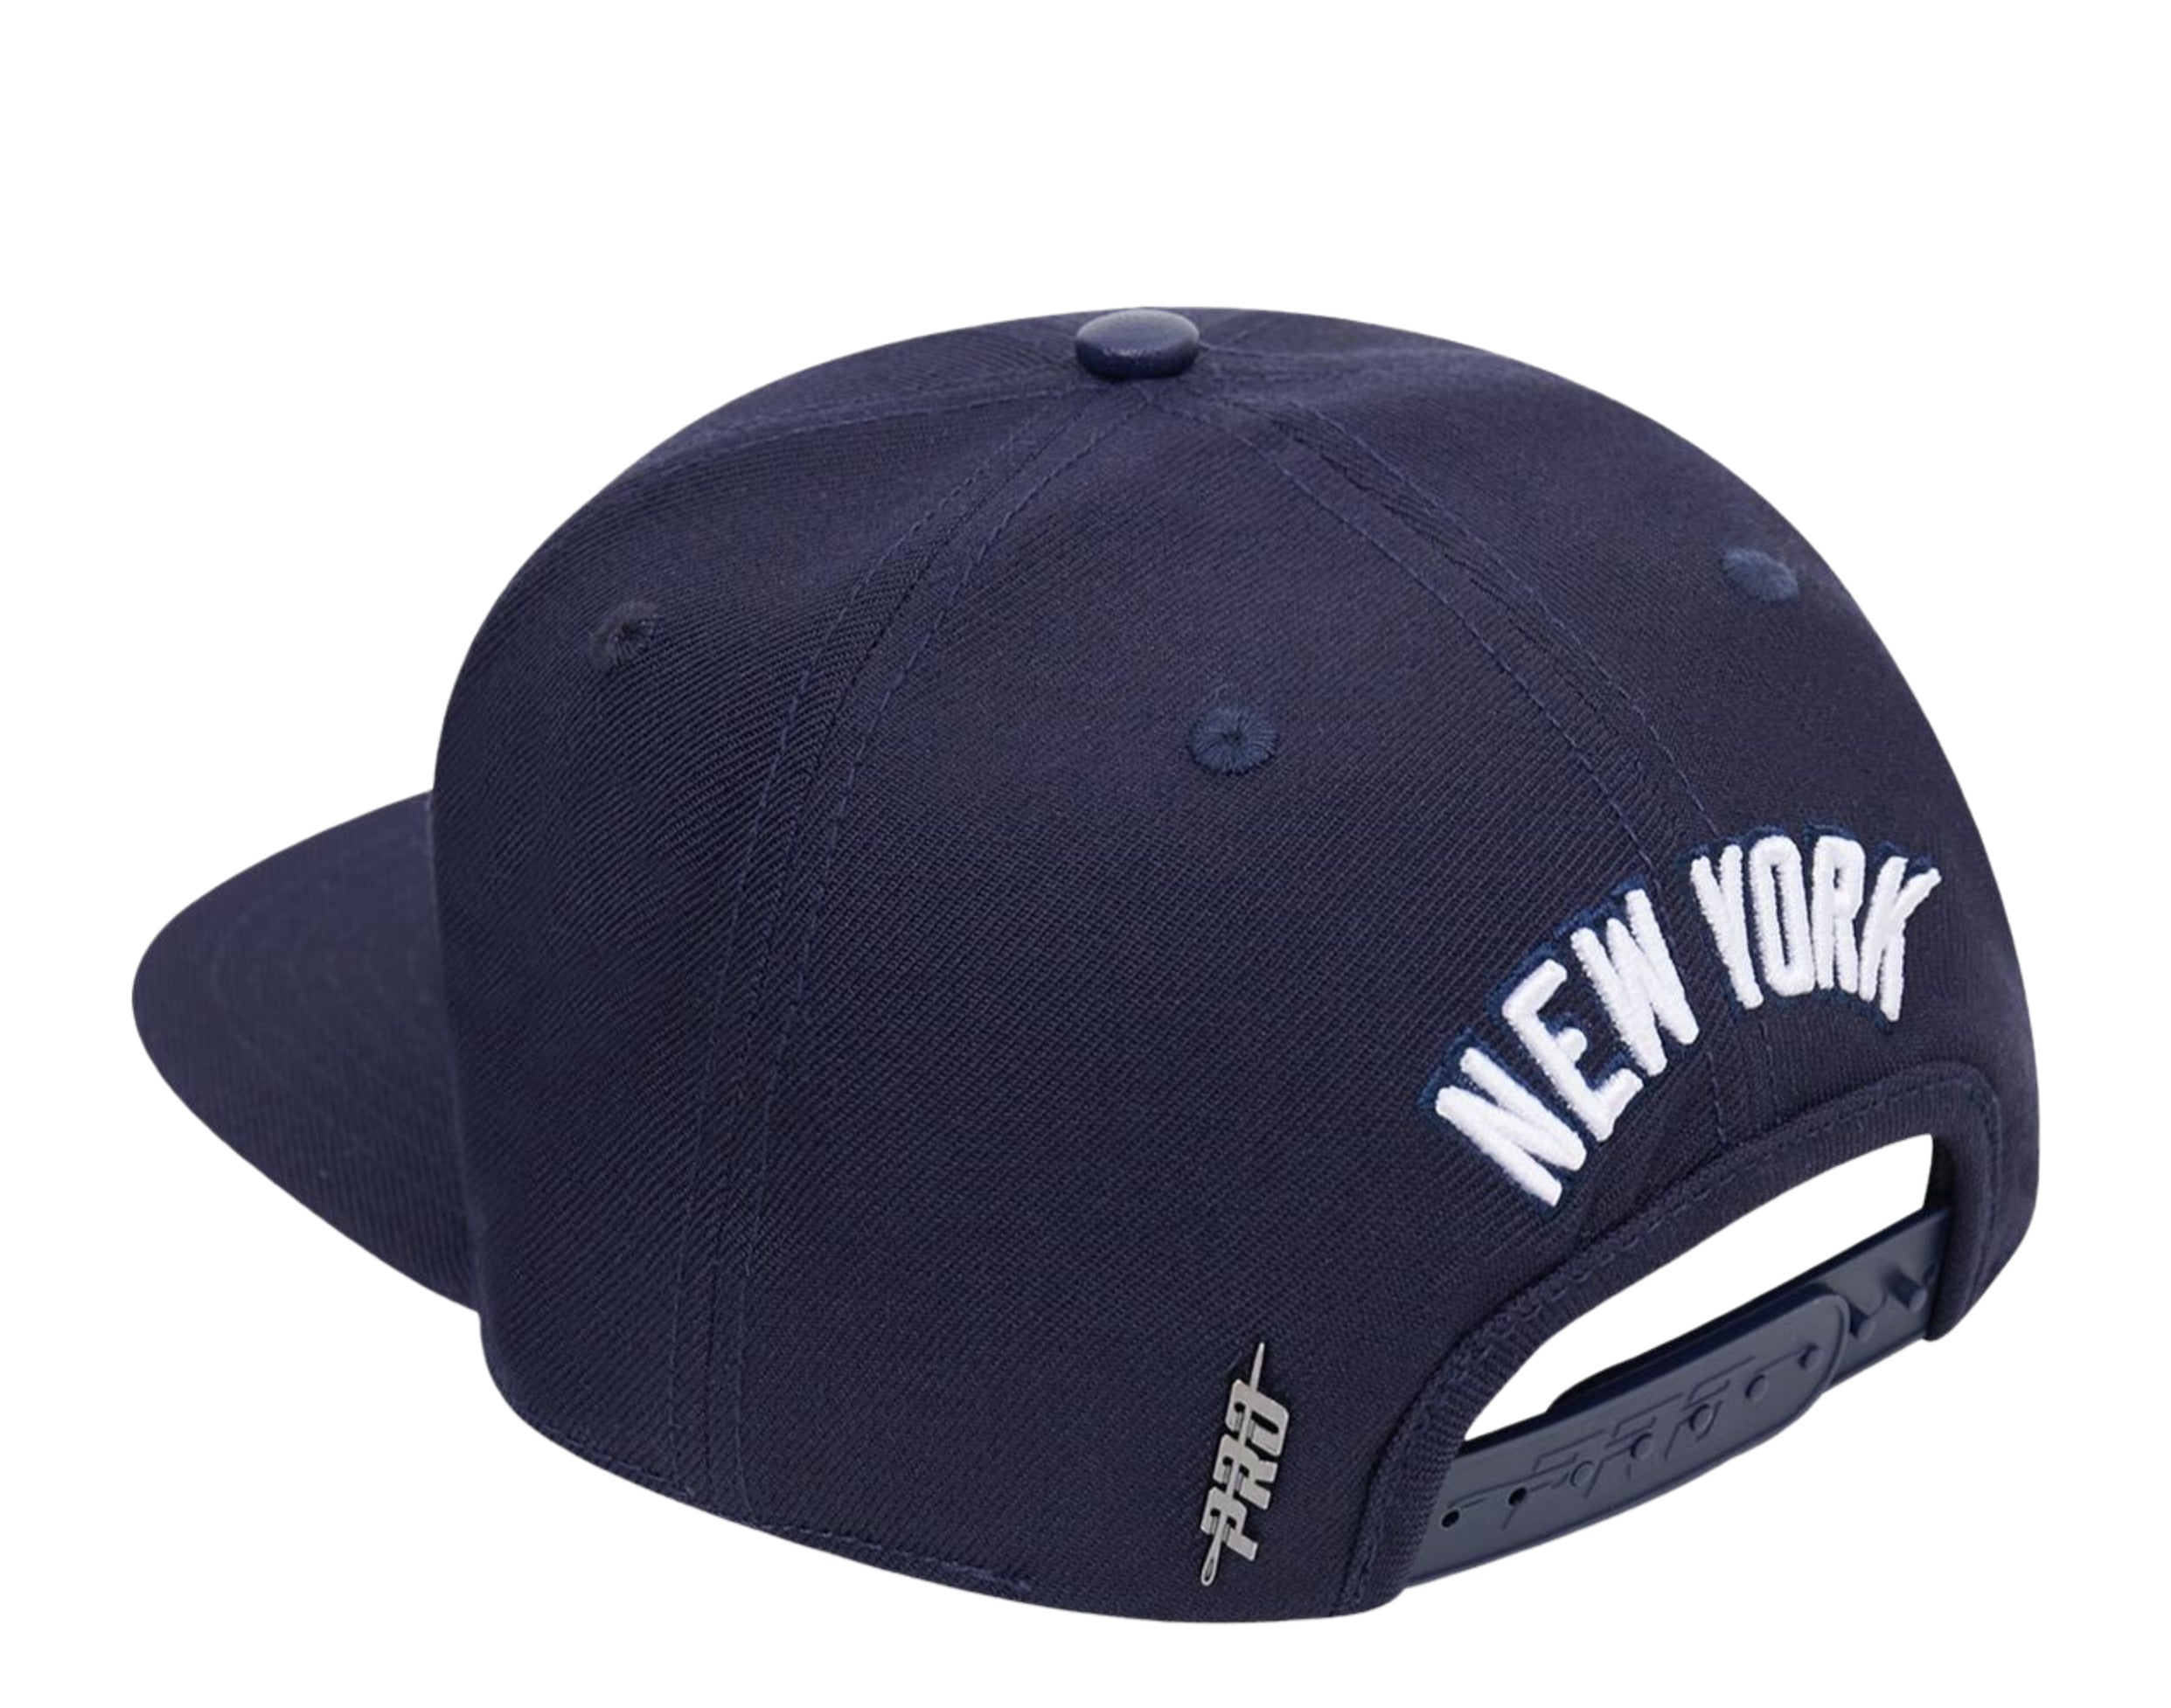 Help me find this World Series 1996 NY cap : r/neweracaps